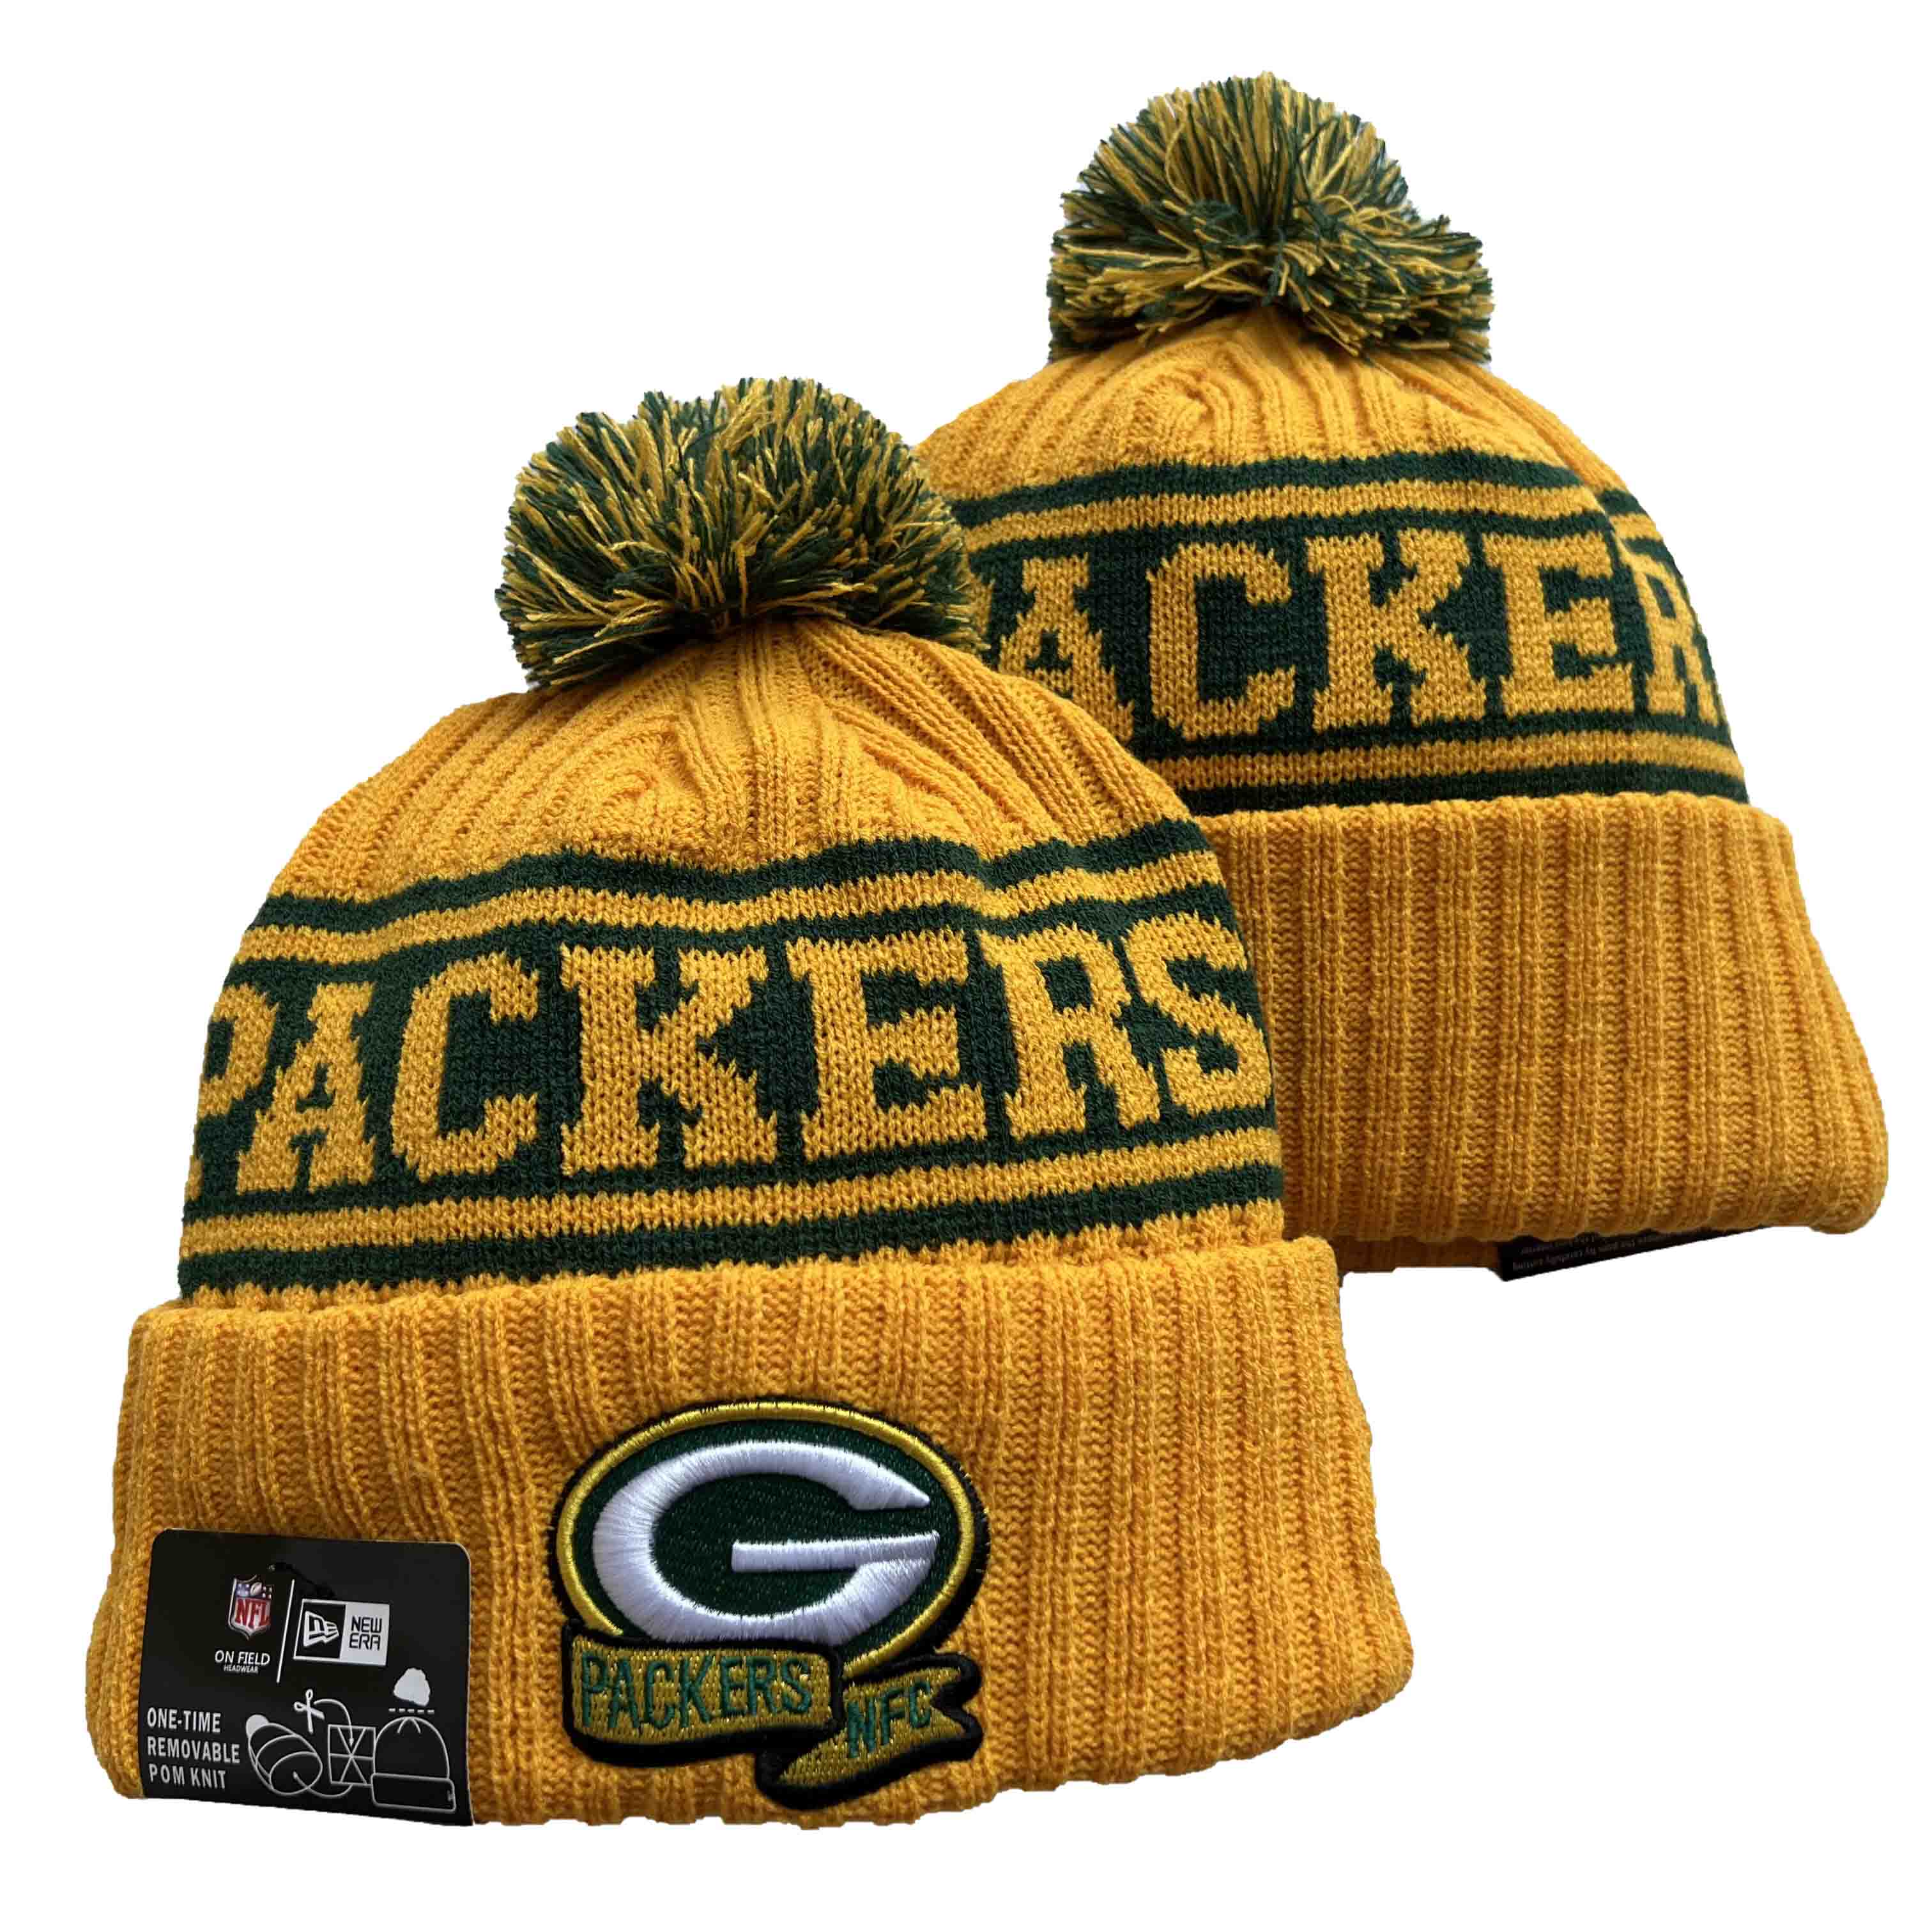 NFL Green Bay Packers Beanies Knit Hats-YD1177